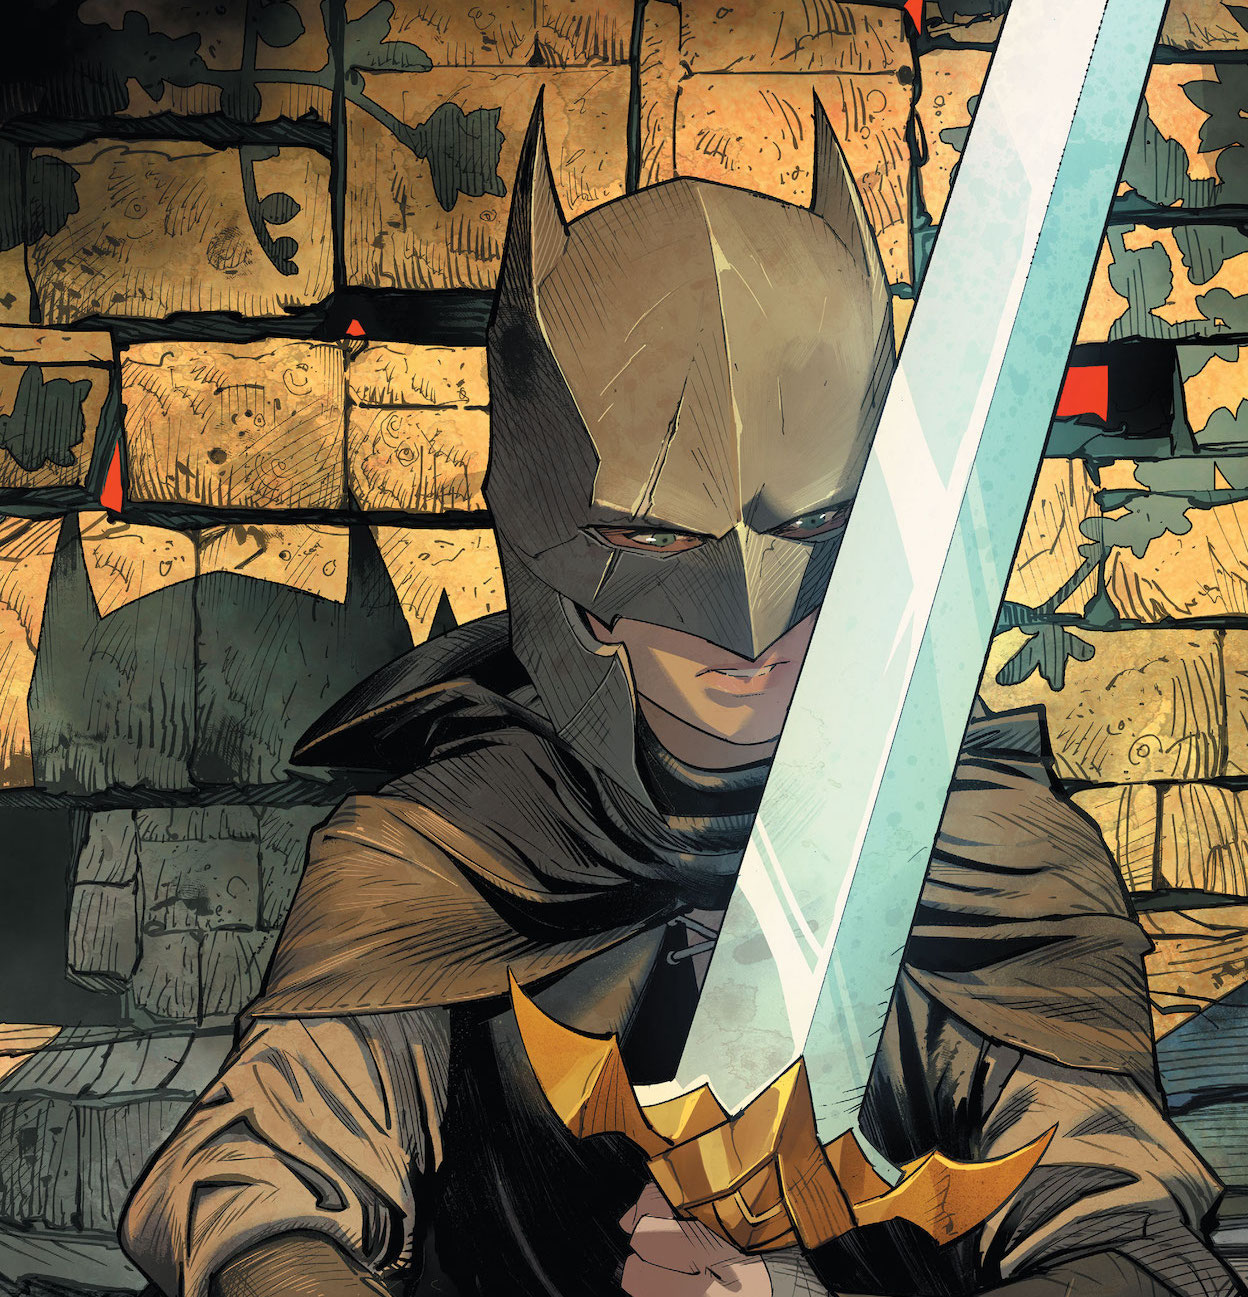 'Dark Knights of Steel: Tales From the Three Kingdoms' #1 features Bane, Robins, and more